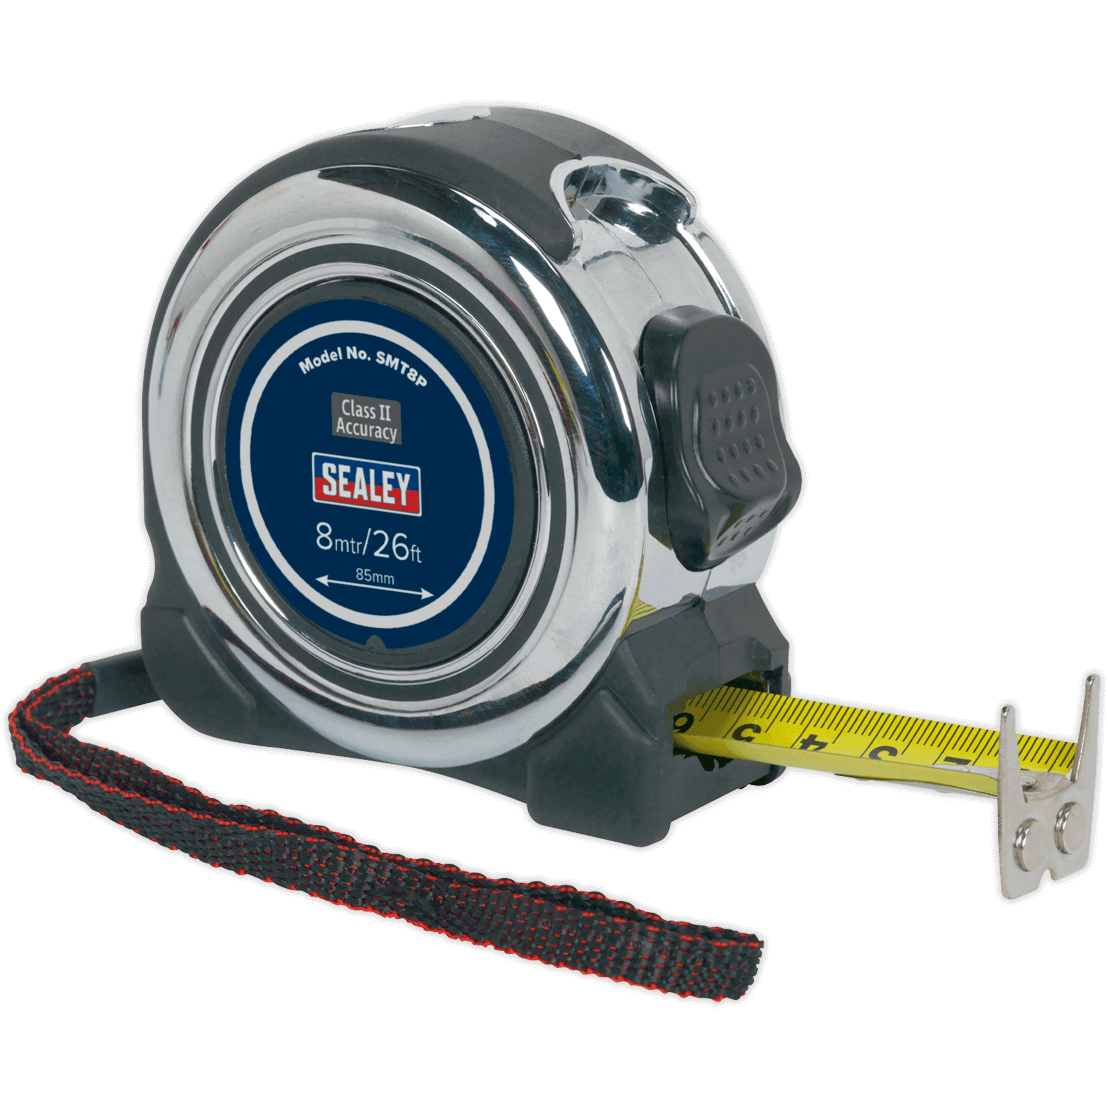 Photos - Tape Measure and Surveyor Tape Sealey Professional Tape Measure Imperial & Metric 26ft / 8m 25mm SMT8P 